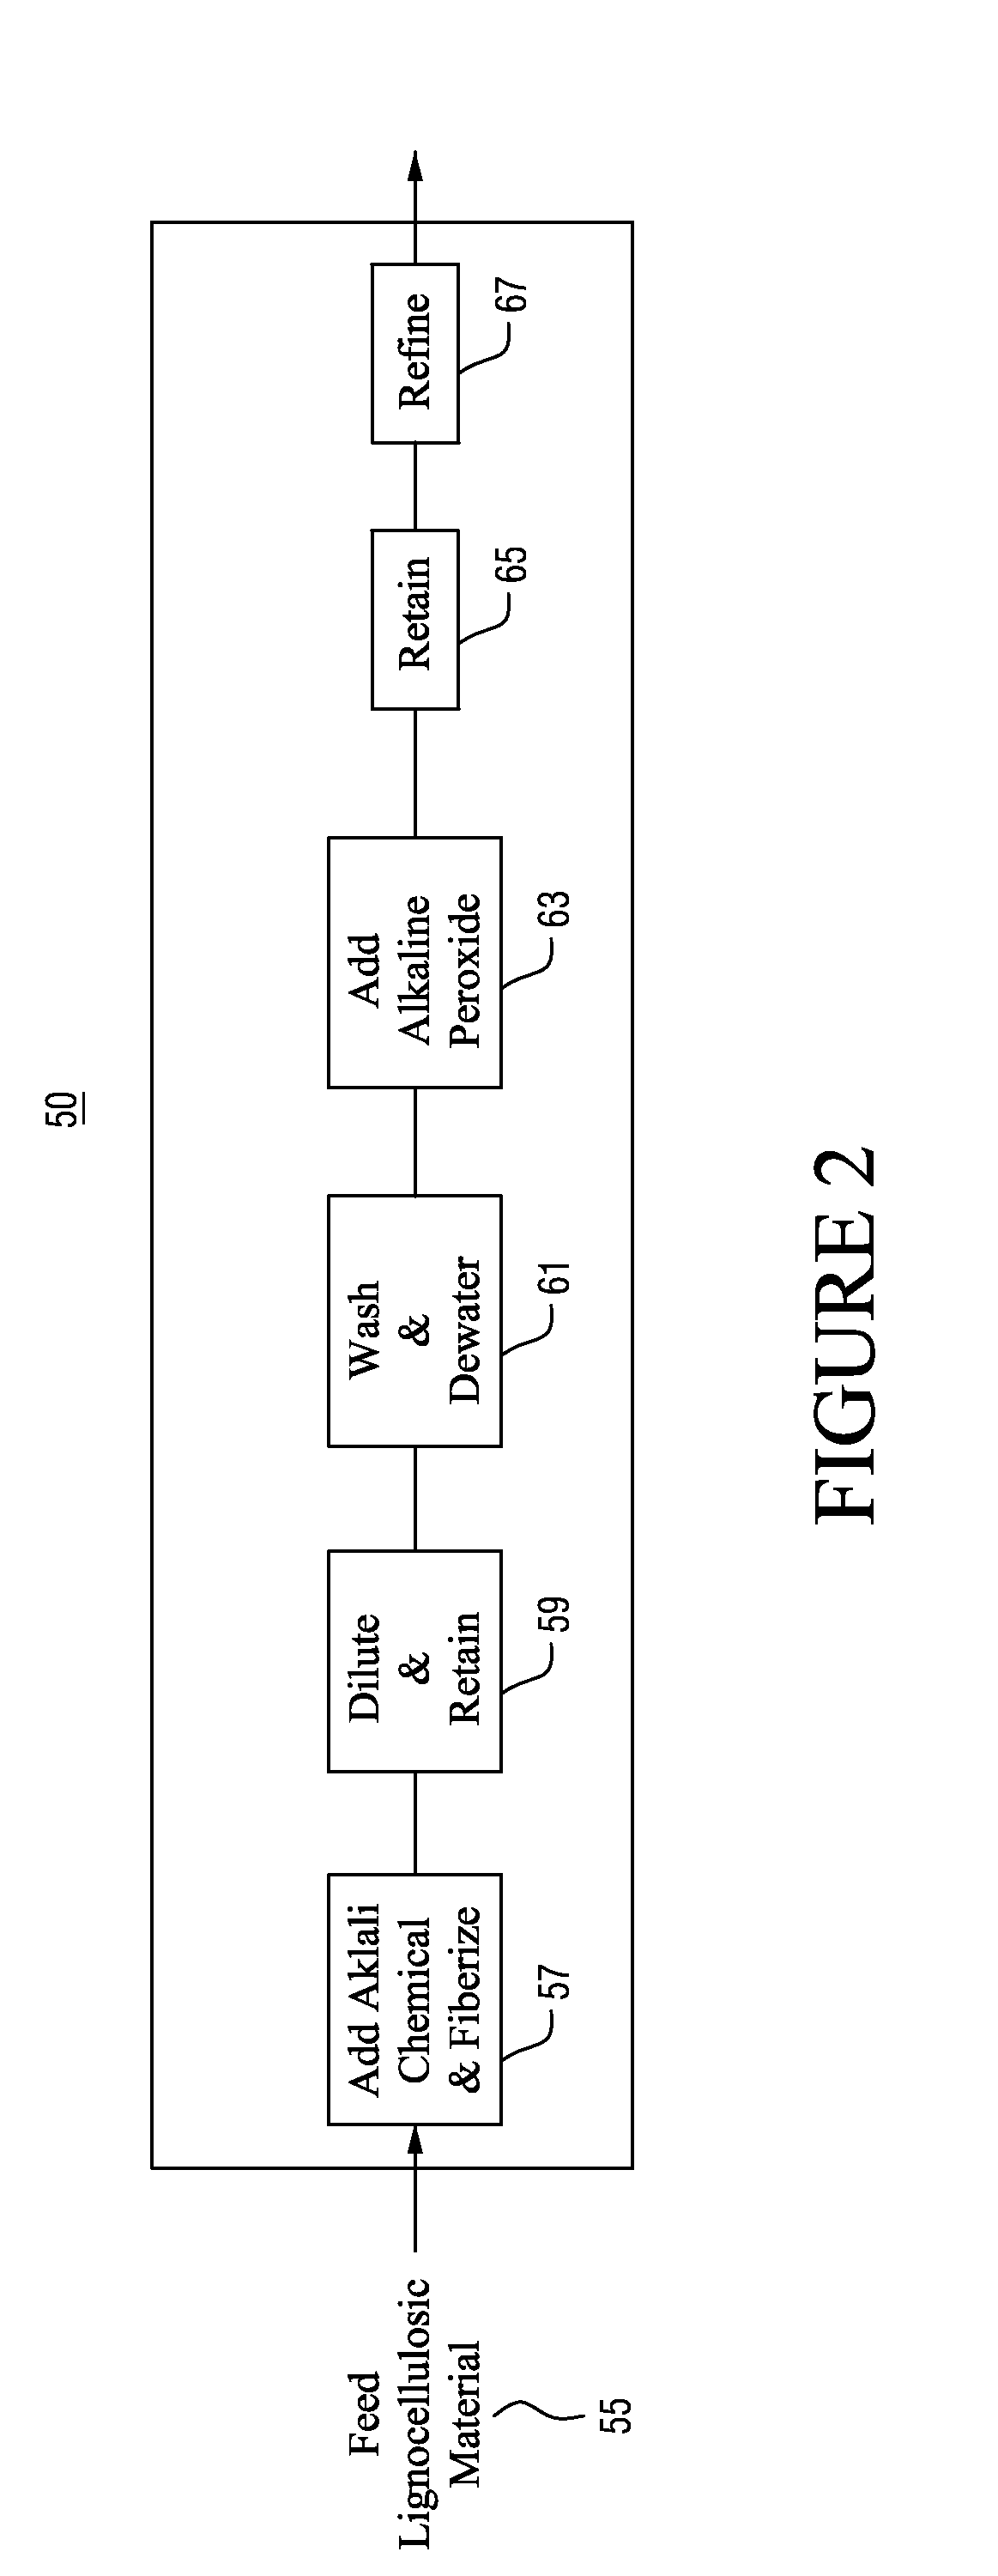 Chemical treatment of lignocellulosic fiber bundle material, and methods and systems relating thereto